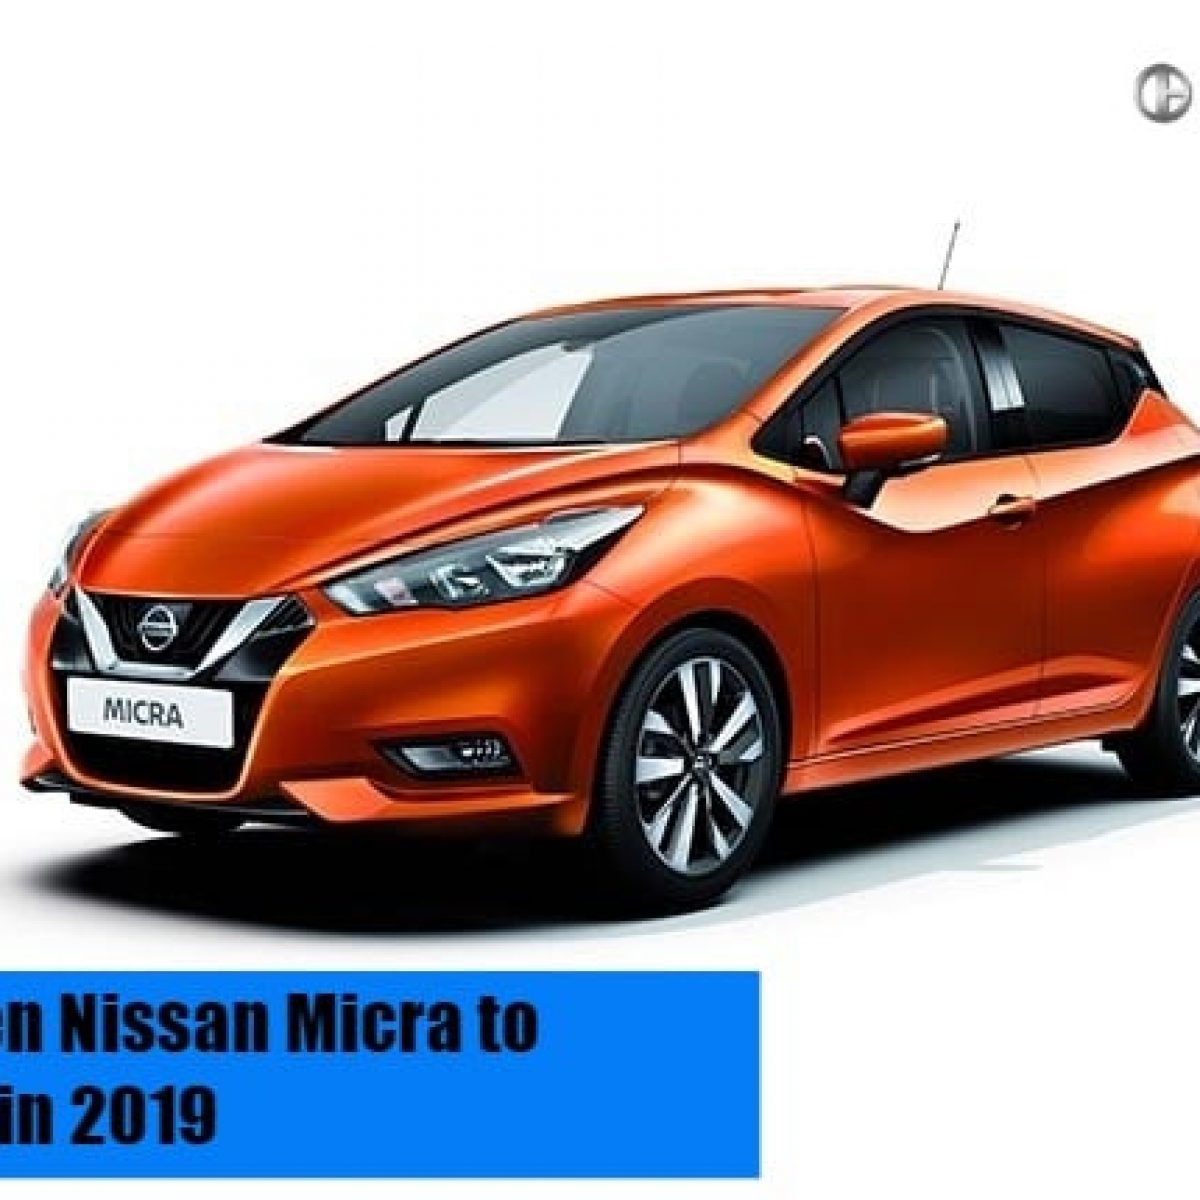 Next Generation Nissan Micra To Launch In 2019 Report